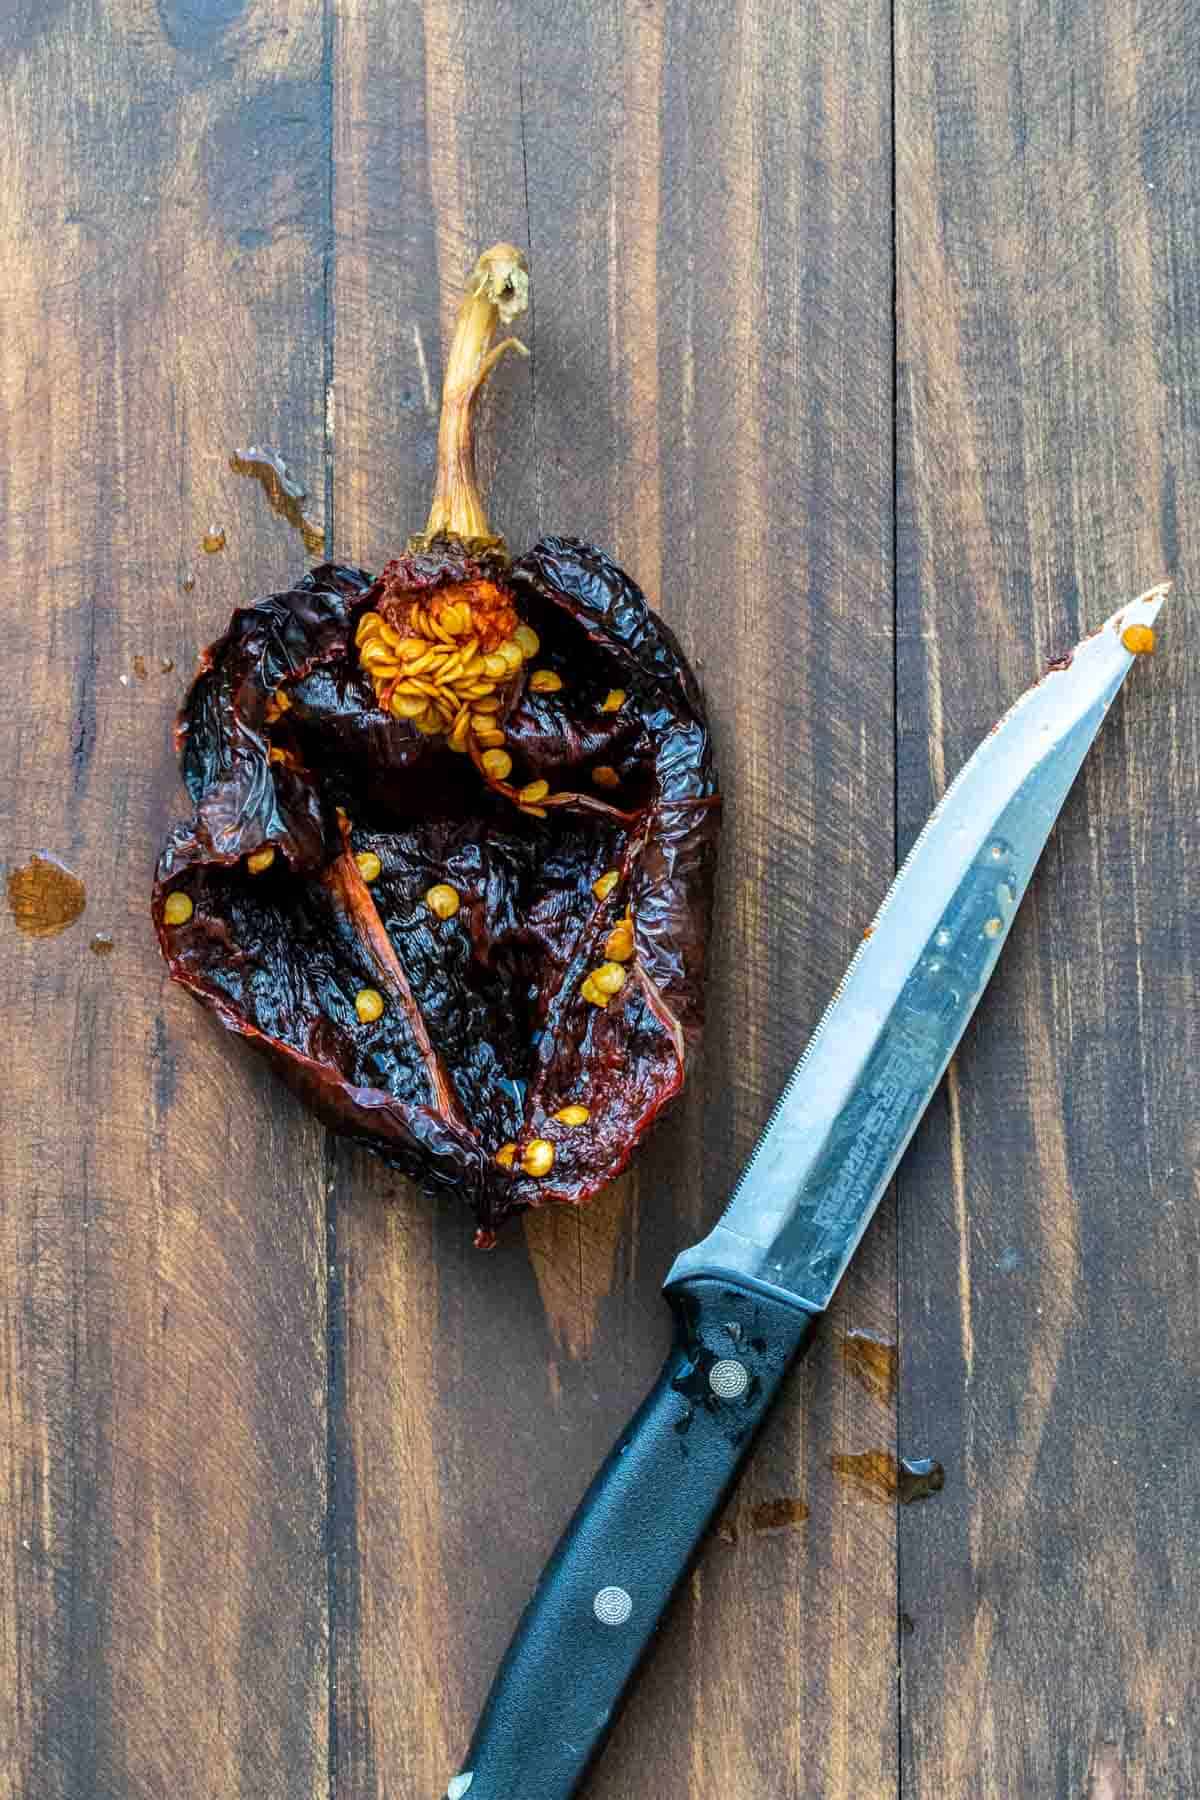 Top view of a soaked dried chili pepper cut open with a knife next to it.